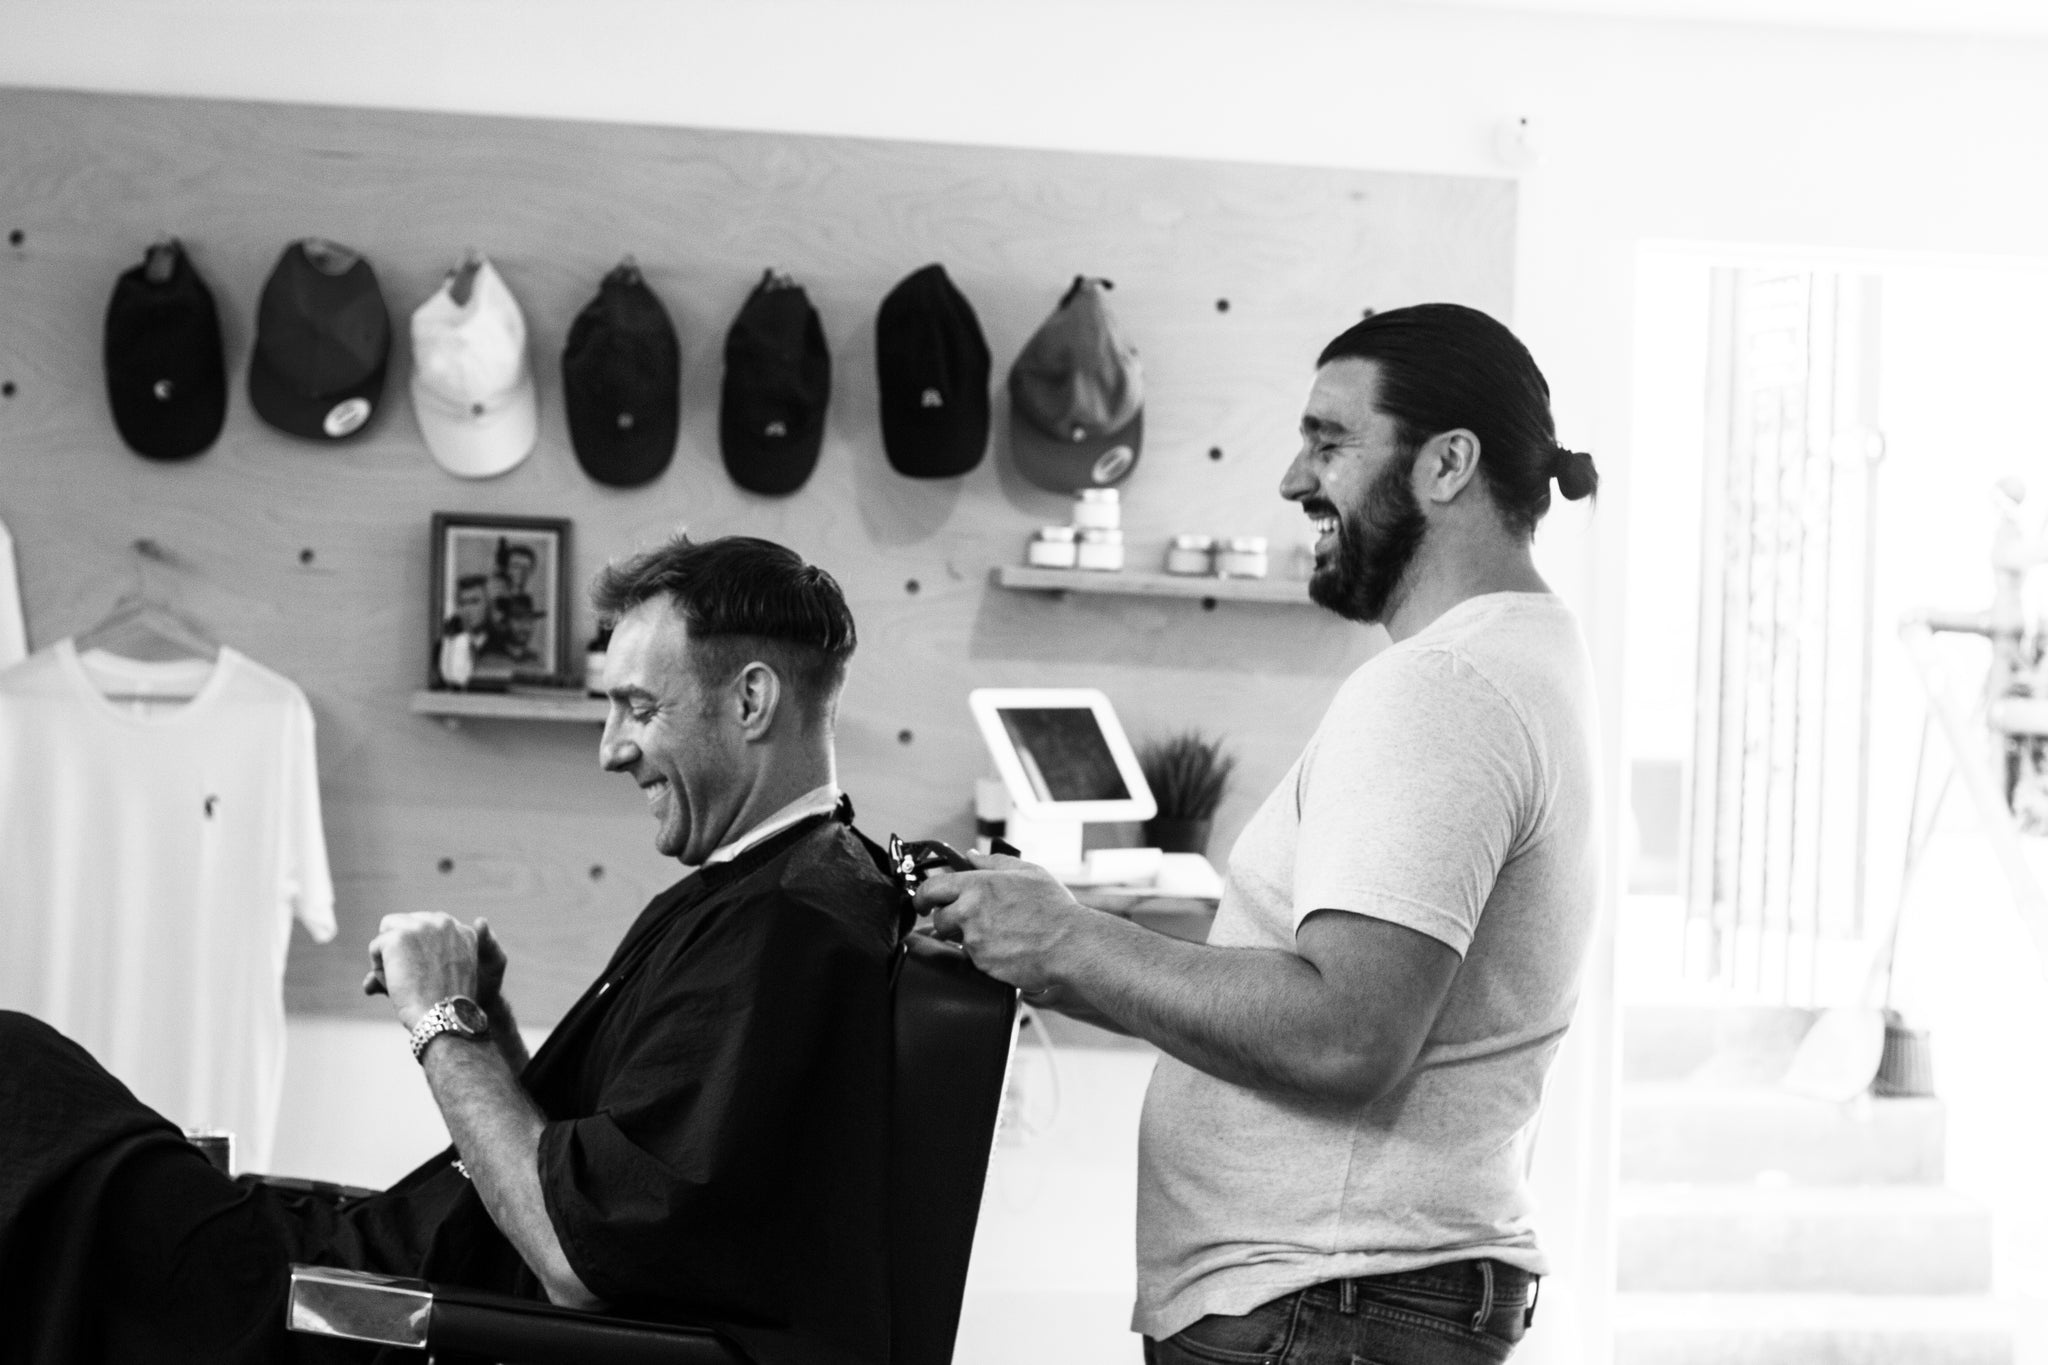 Hair Terminology: How to Tell Your Barber Exactly What You Want 